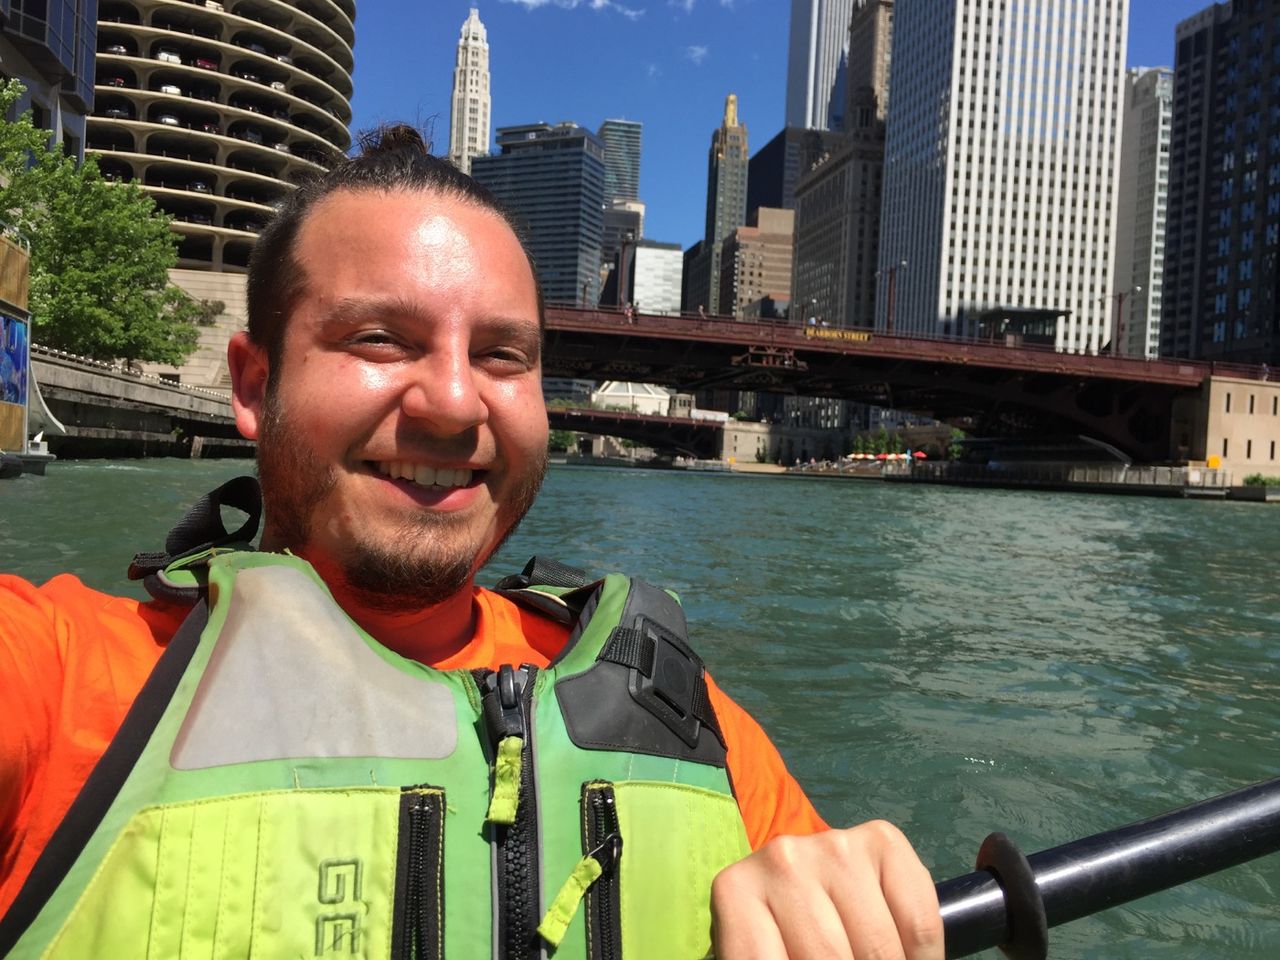 Selfie from a kayak in the Chicago river.